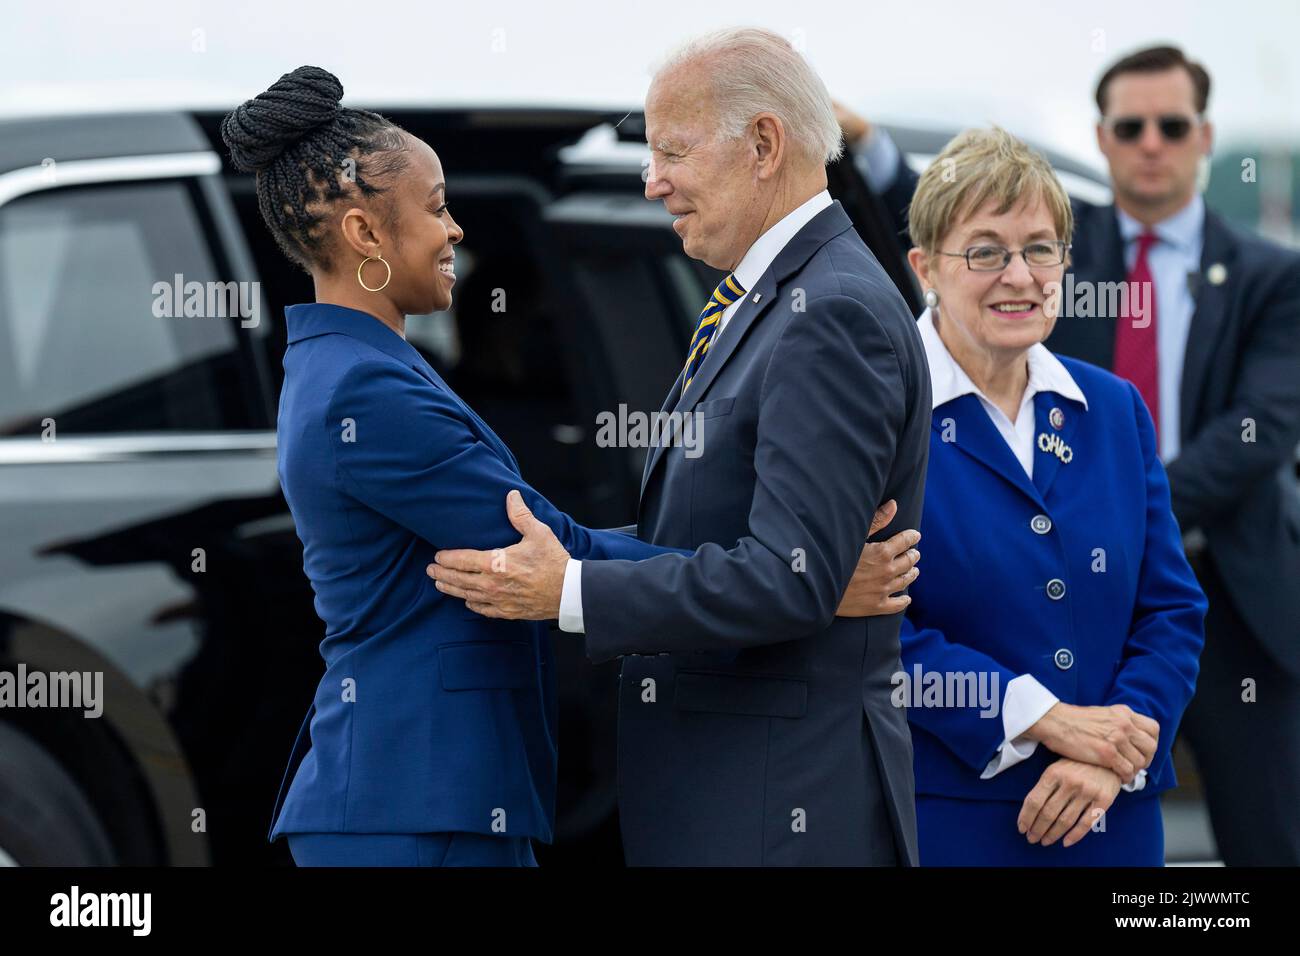 President Joe Biden disembarks Air Force One at Cleveland Hopkins International Airport in Cleveland, Ohio Wednesday, July 6, 2022, and is greeted by U.S. Rep. Shontel Brown, D-Ohio. (Official White House Photo by Adam Schultz) Stock Photo